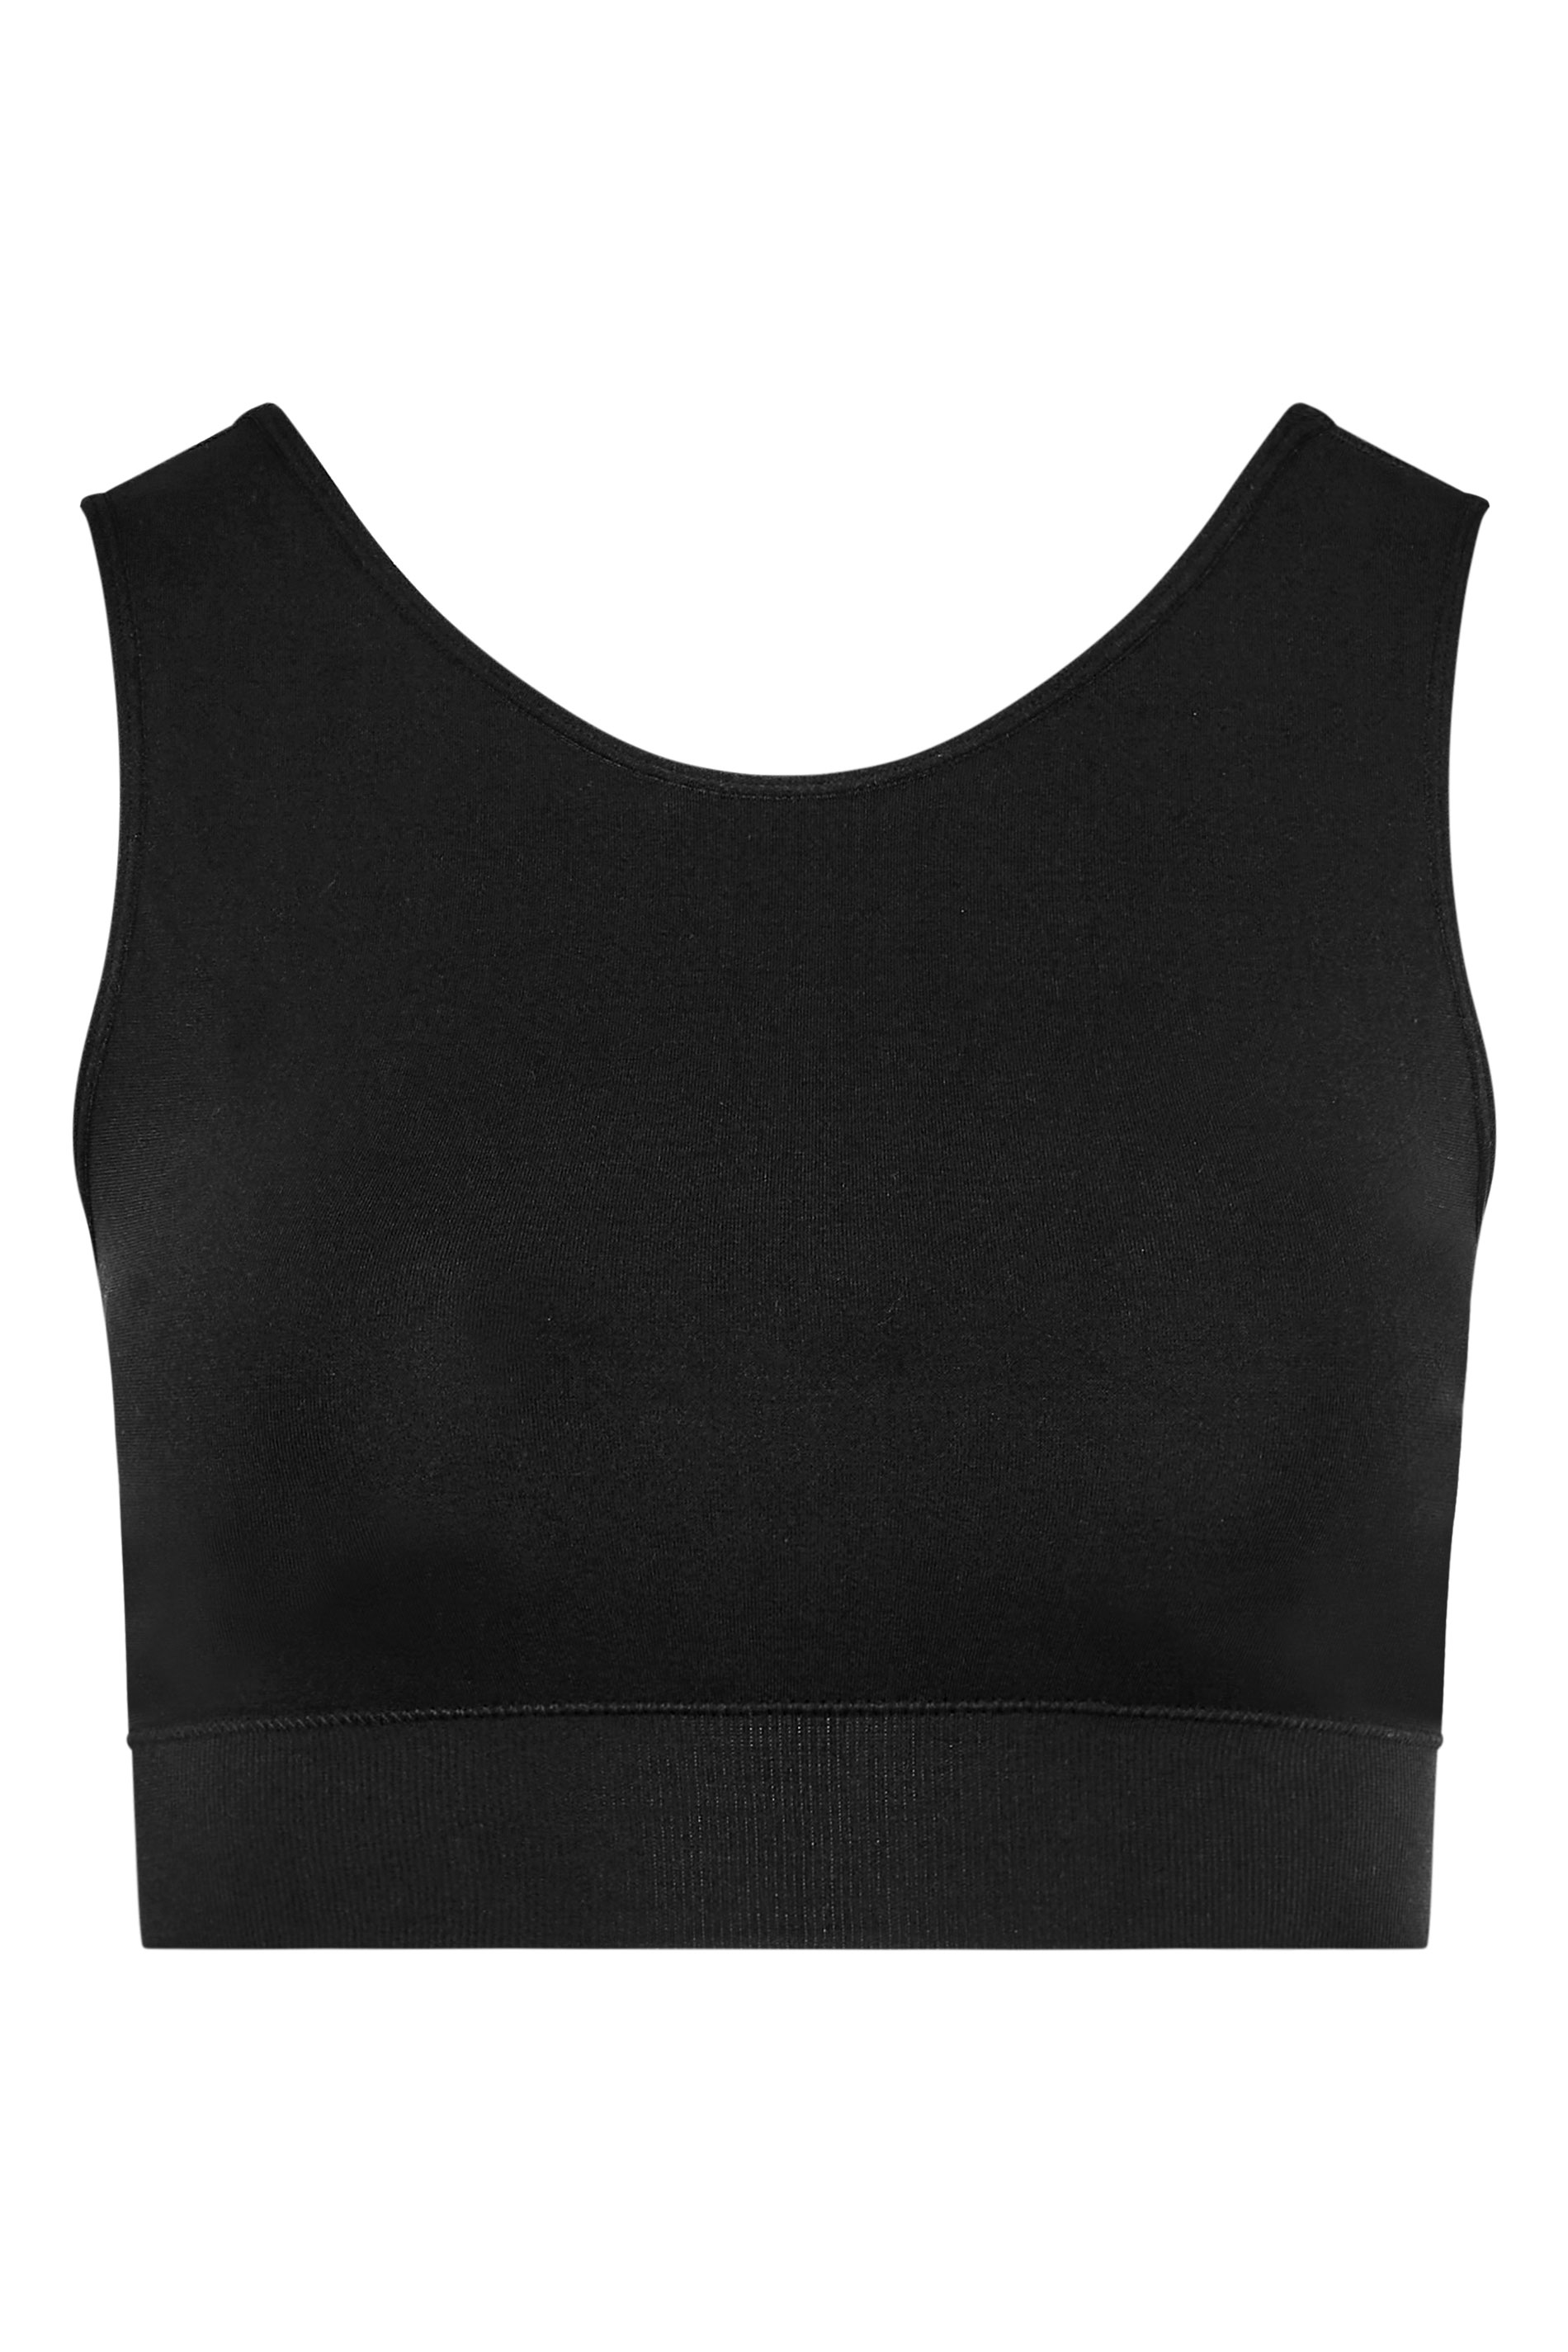 Yours Curve Black Seamless Longline Padded Bralette Top | Yours Clothing 3